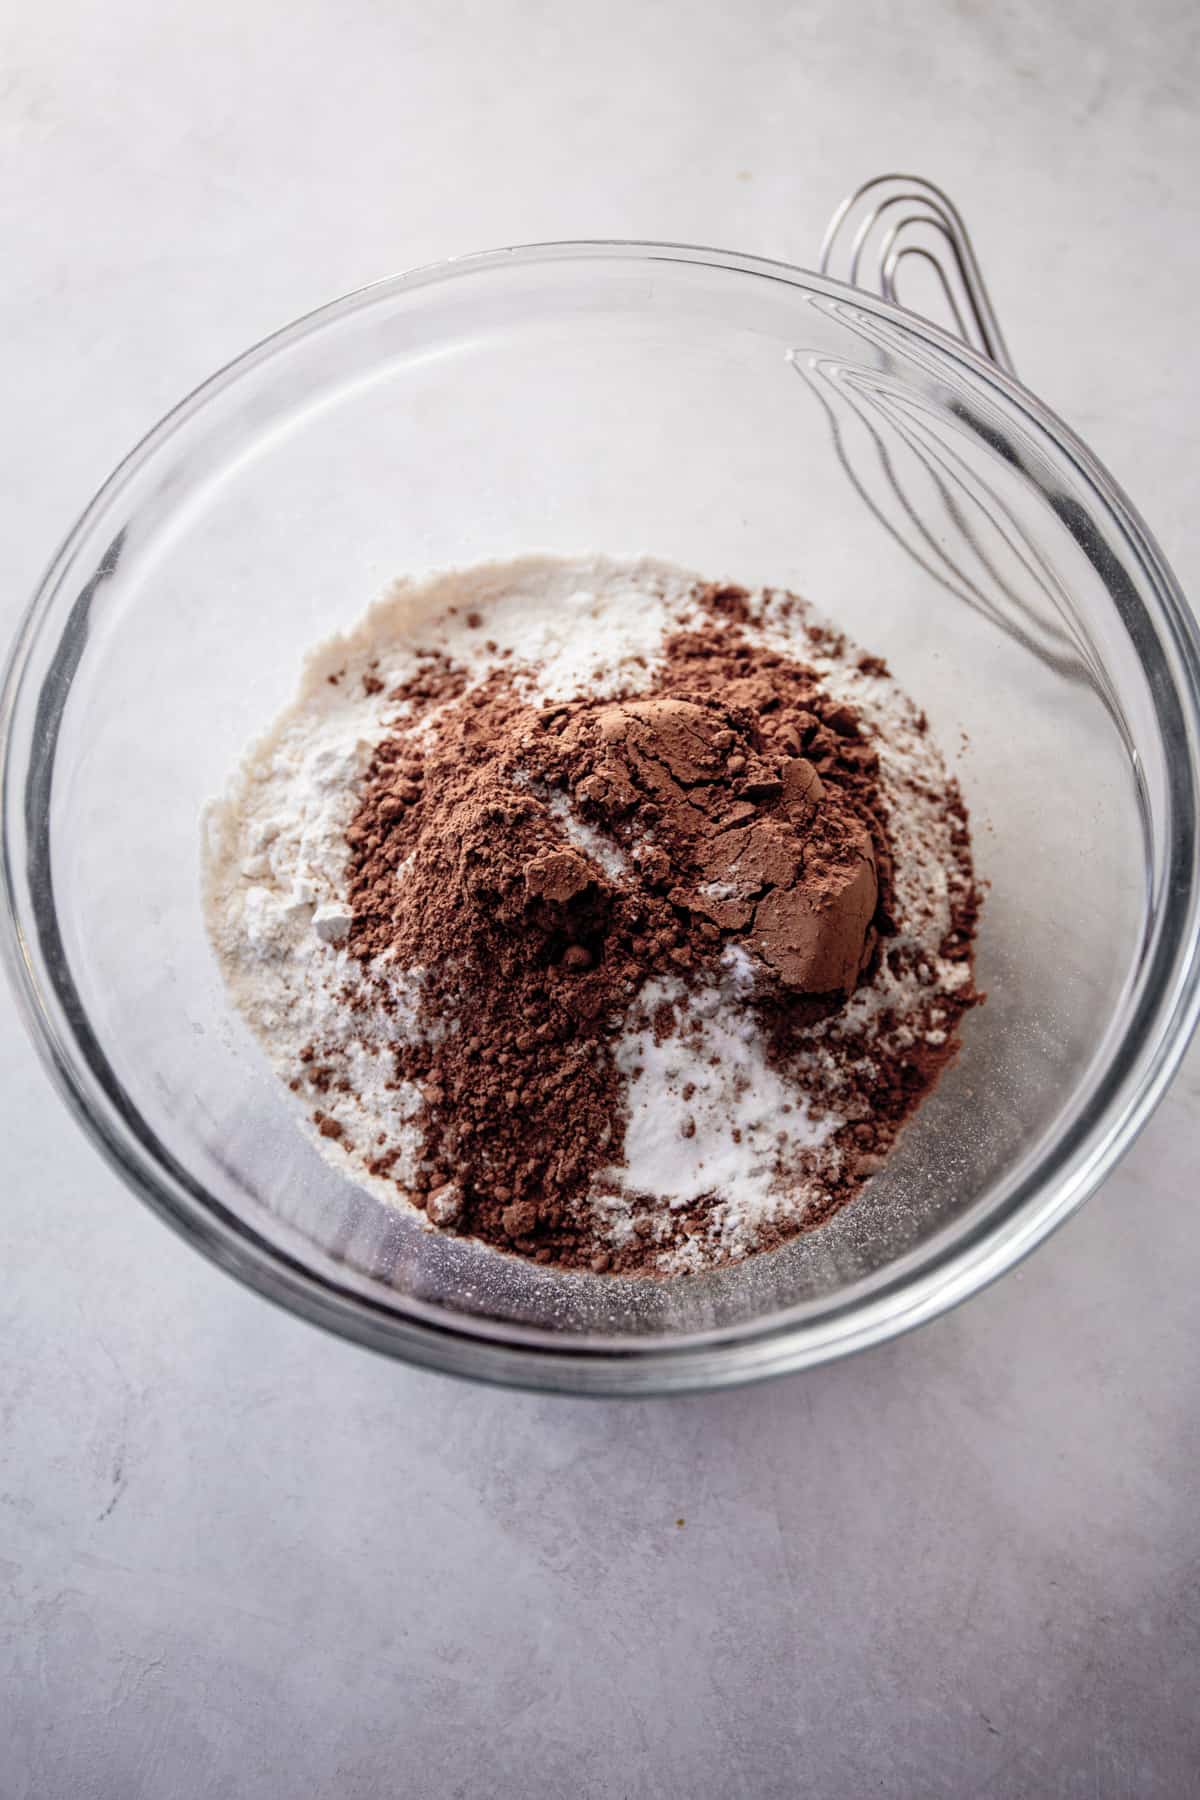 dry ingredients for cookies in a clear glass bowl